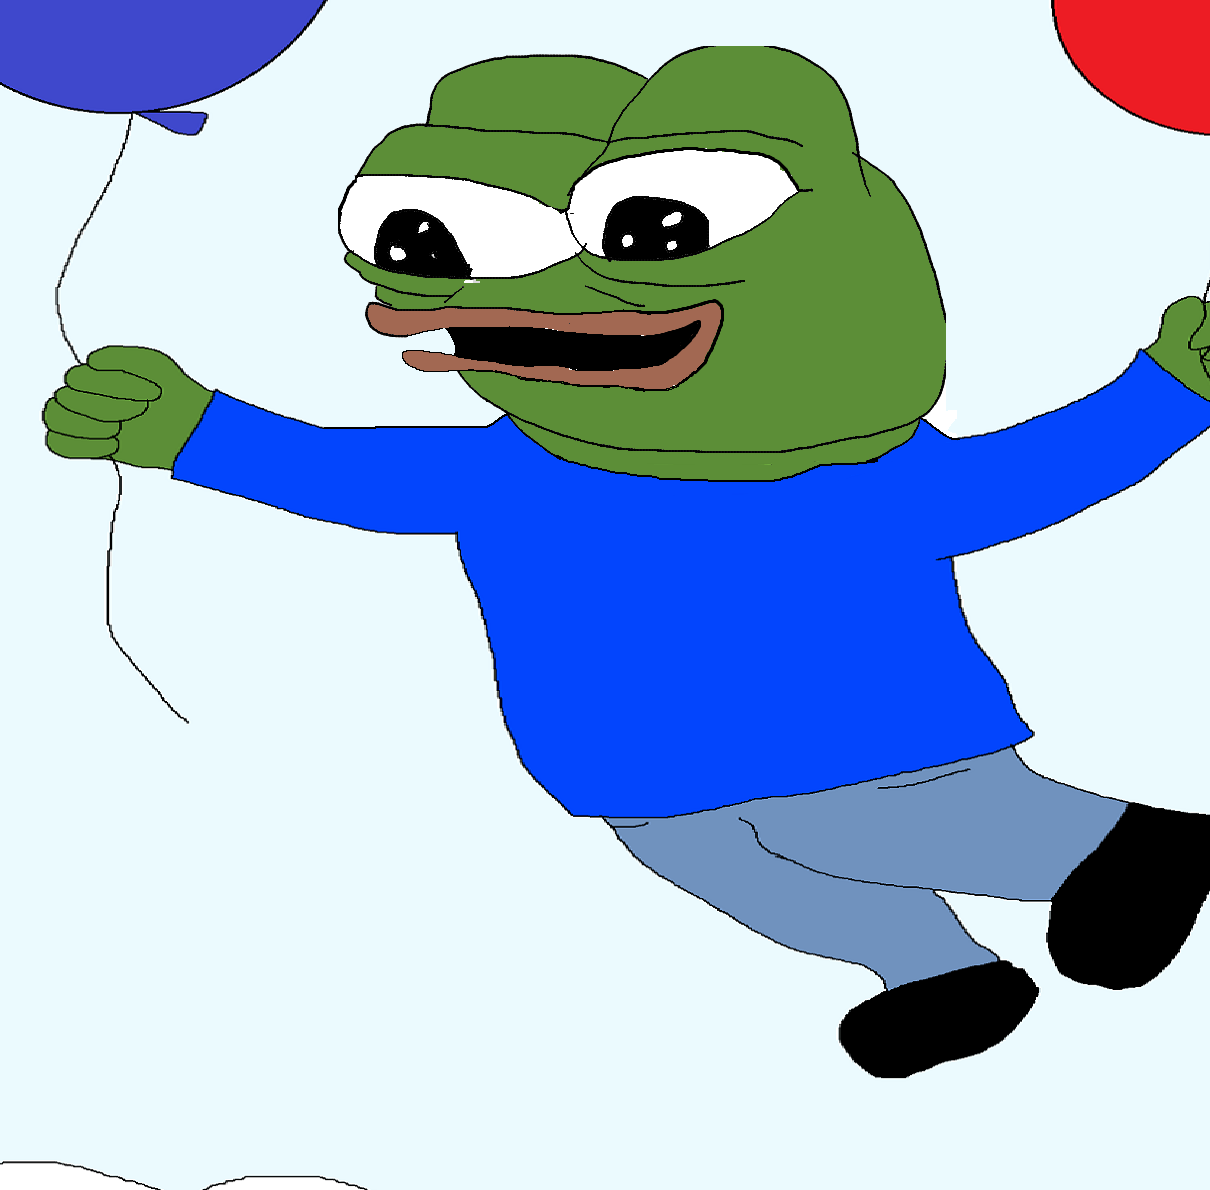 pepe floating away holding balloons.